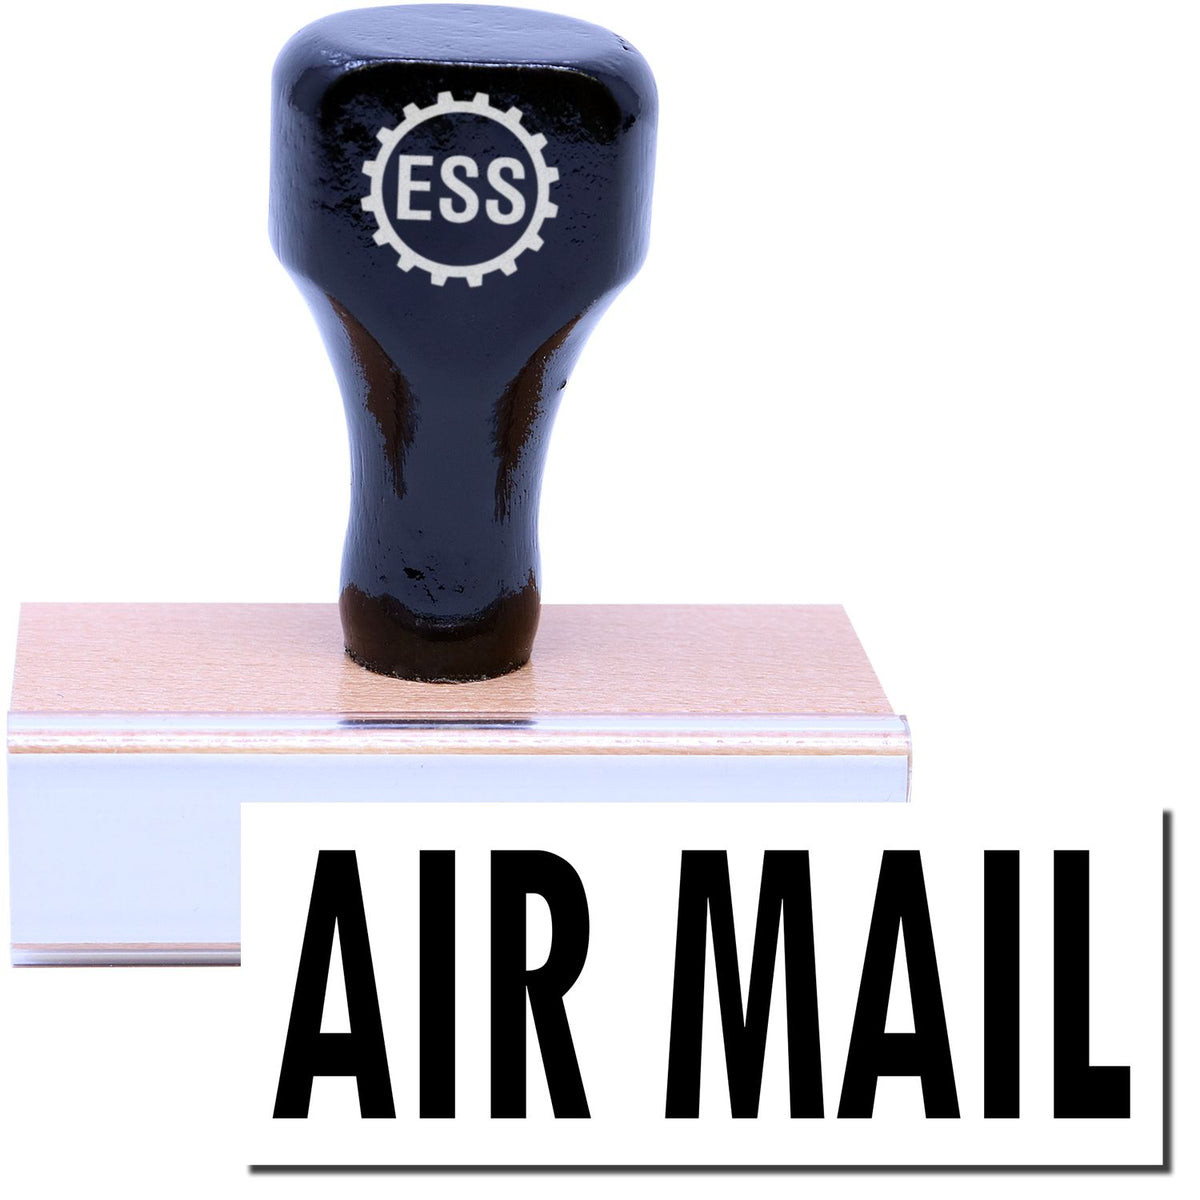 A stock office rubber stamp with a stamped image showing how the text &quot;AIR MAIL&quot; in a large font is displayed after stamping.